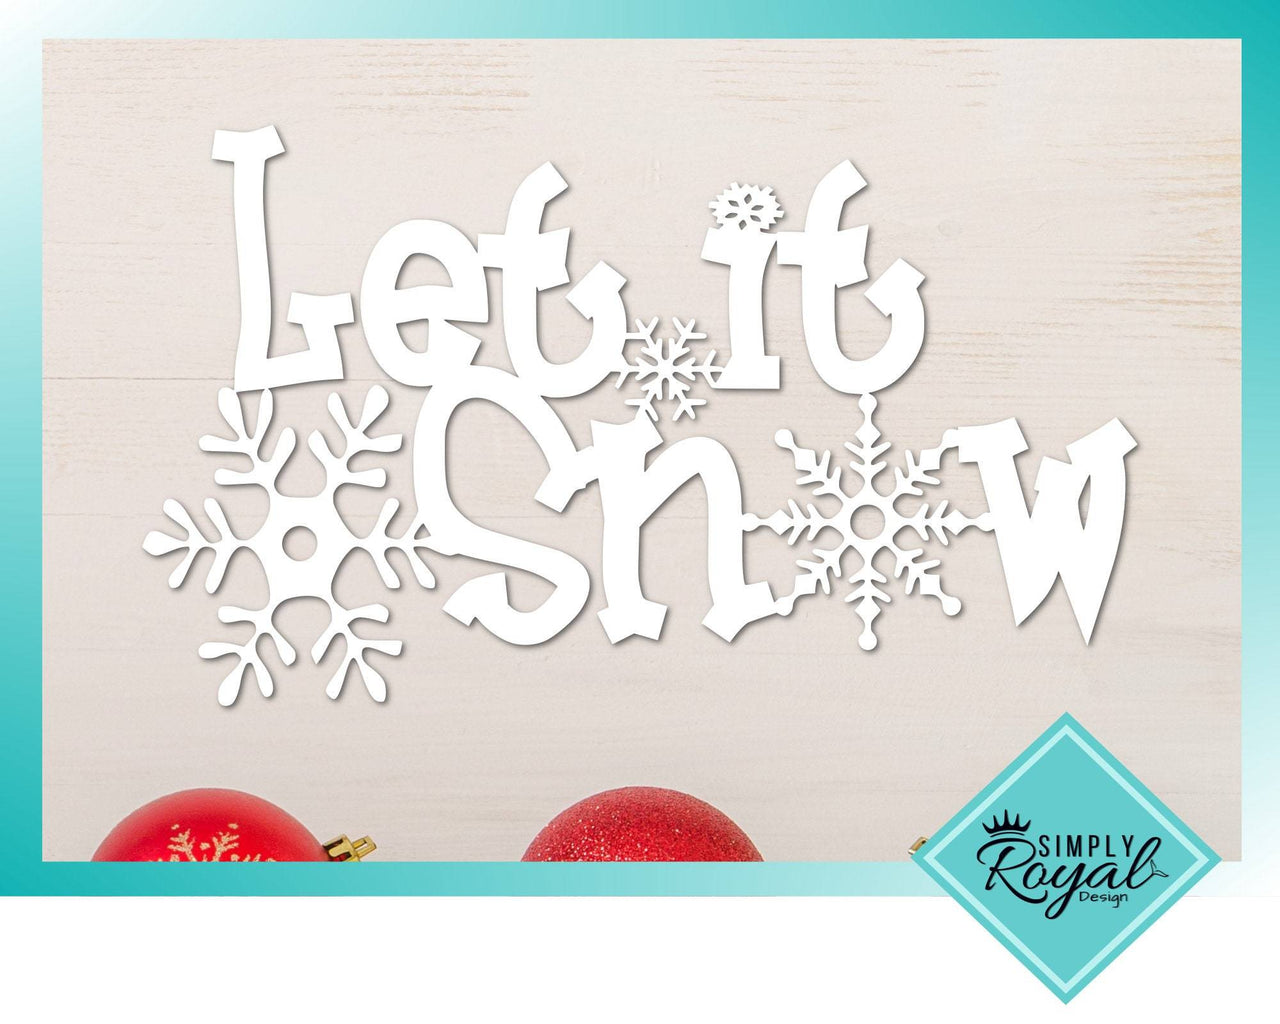 Let It Snow Metal Sign | Outdoor Winter Decor | Snowflake Winter Sign | Holiday Decor | Rustic Metal Christmas Sign |  Snow Metal Wall Decor